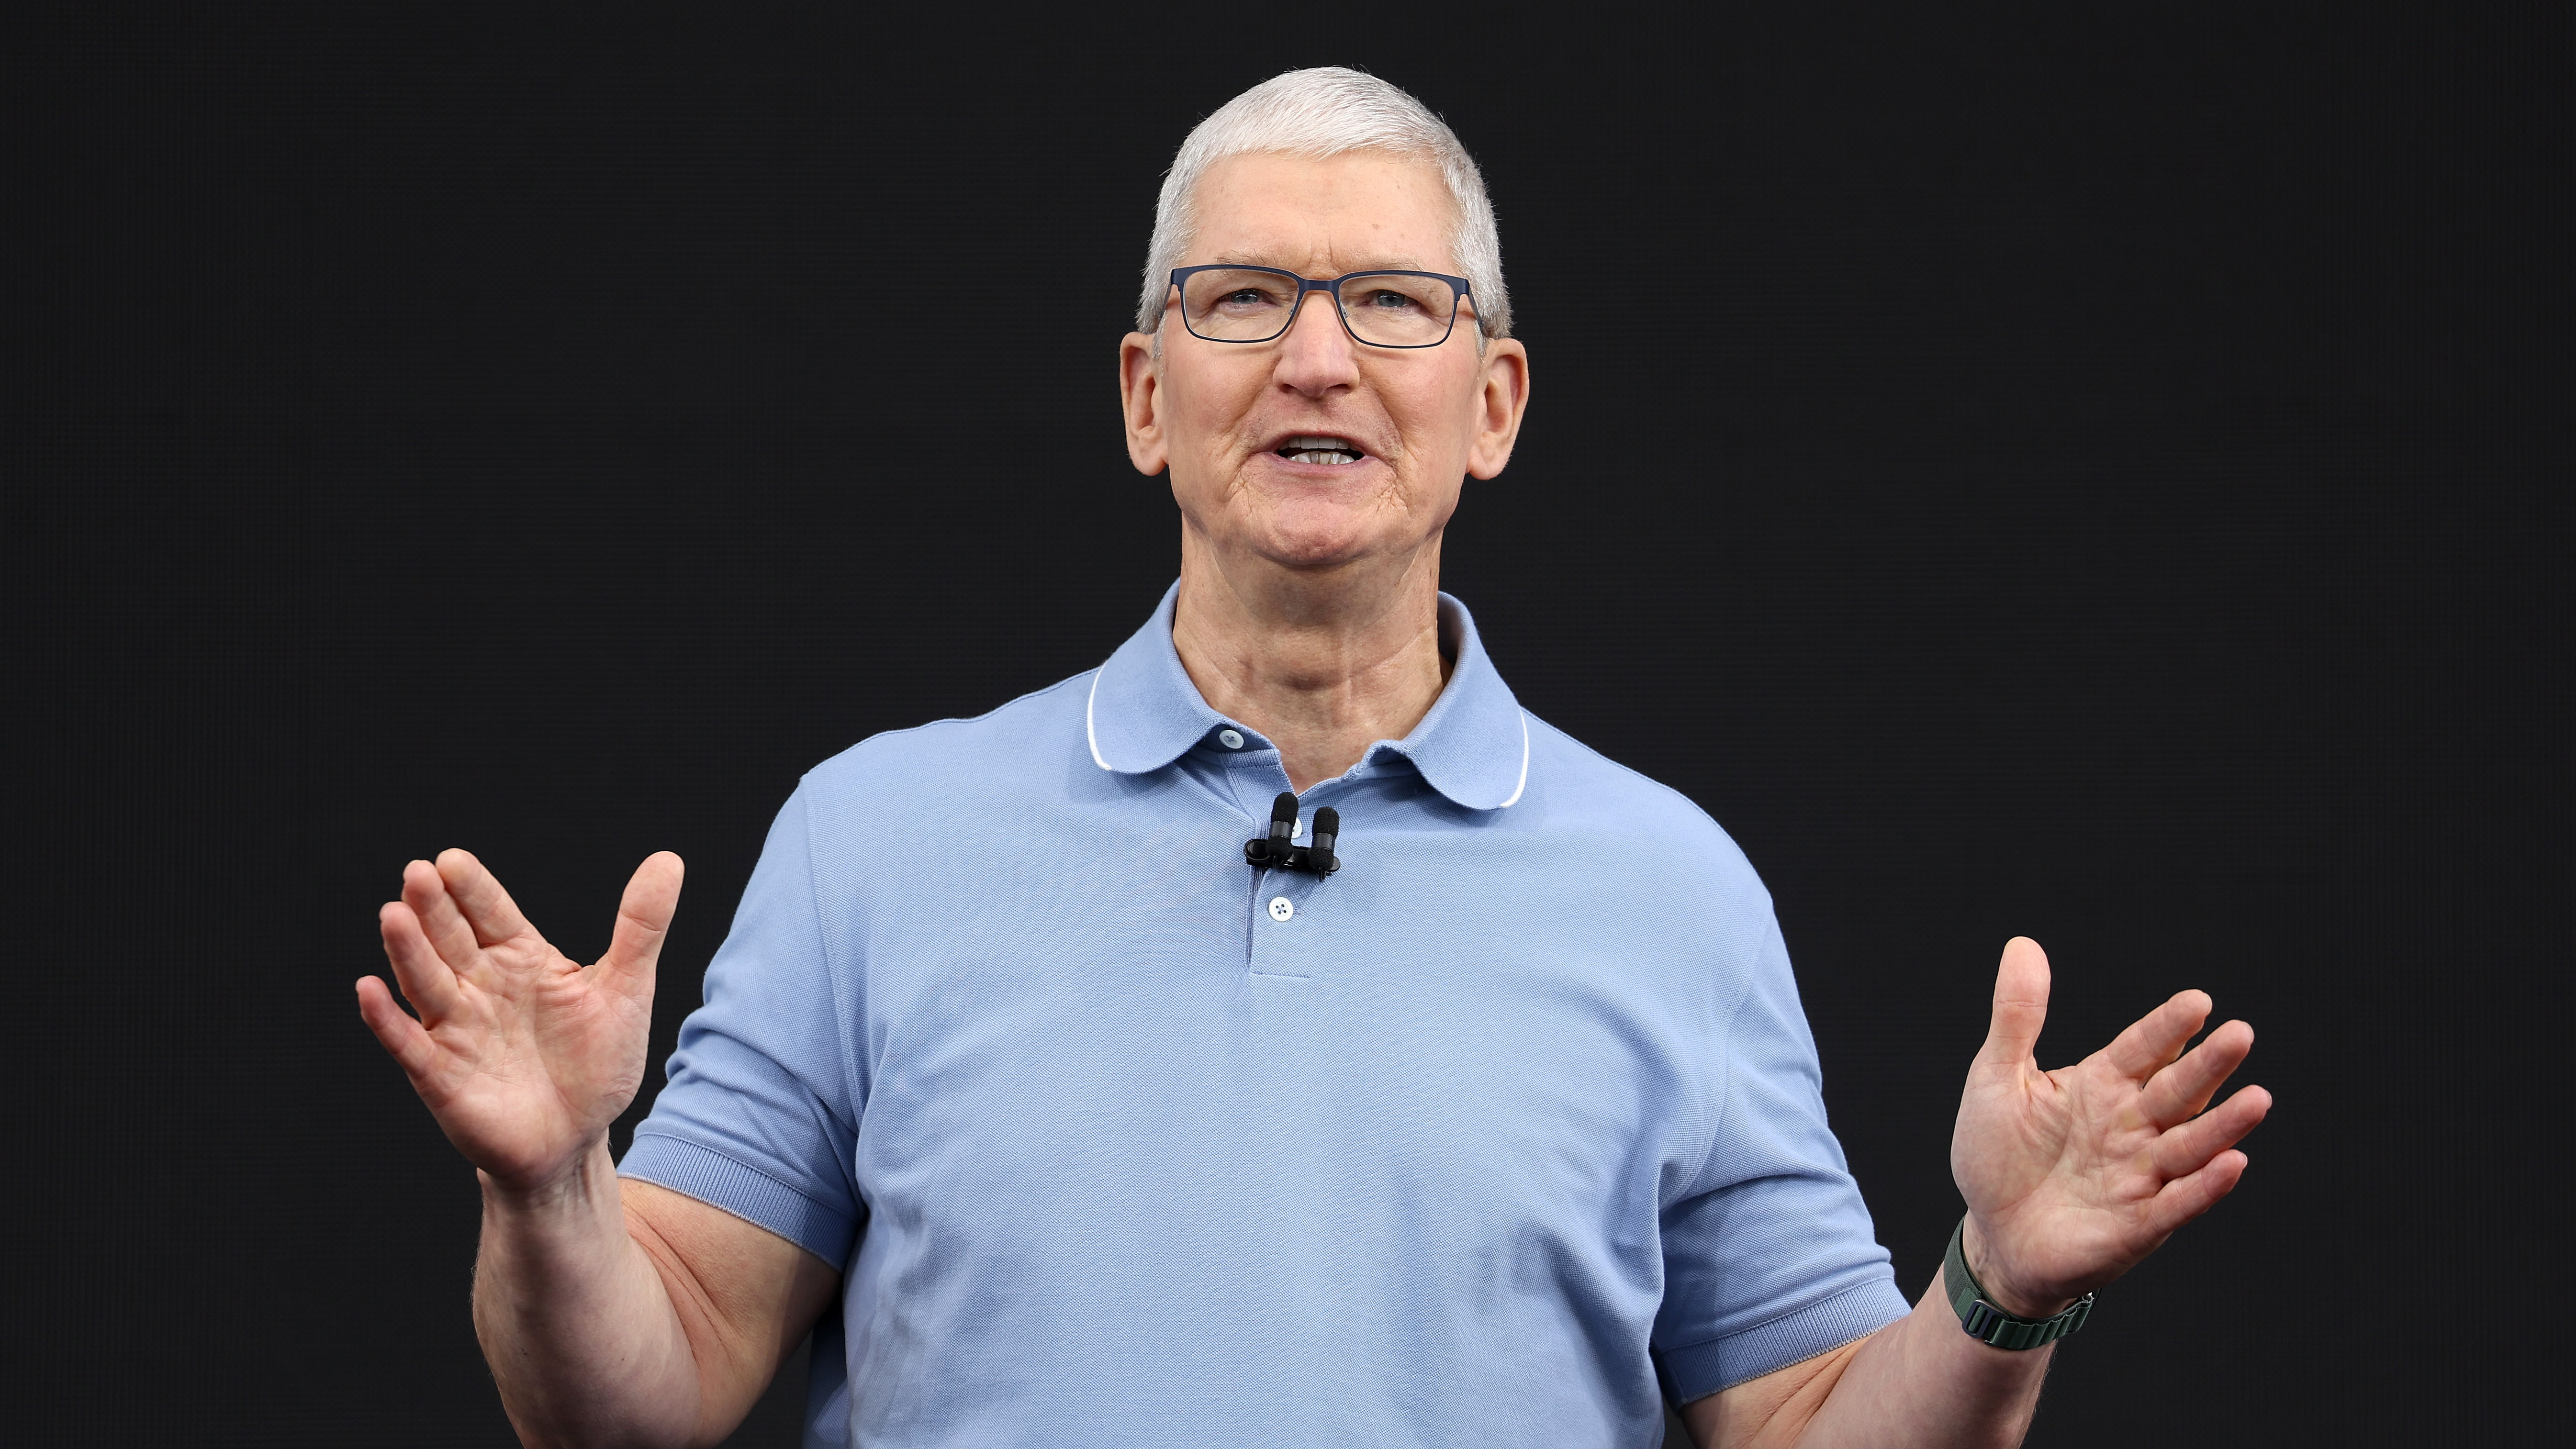 Tim Cook presenting at a recent Apple launch